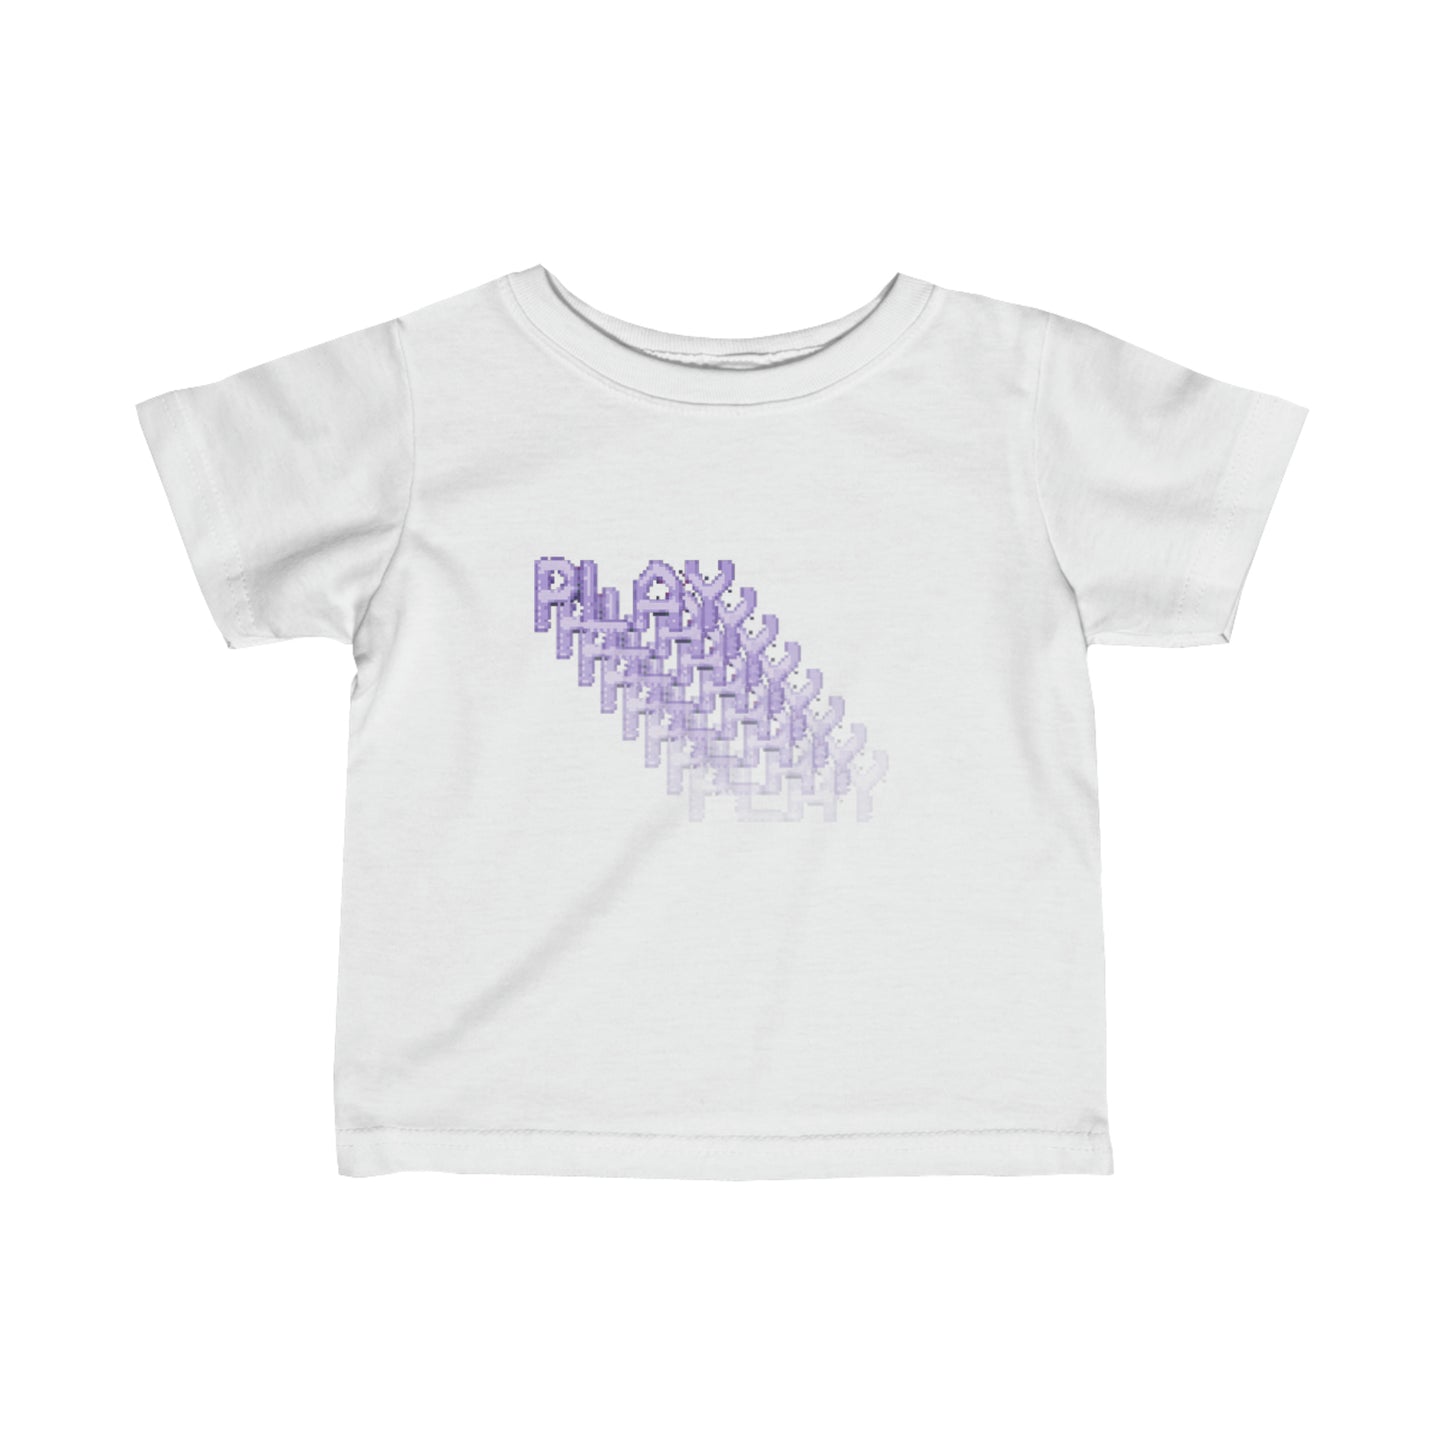 Repeating Play Infant T-Shirt